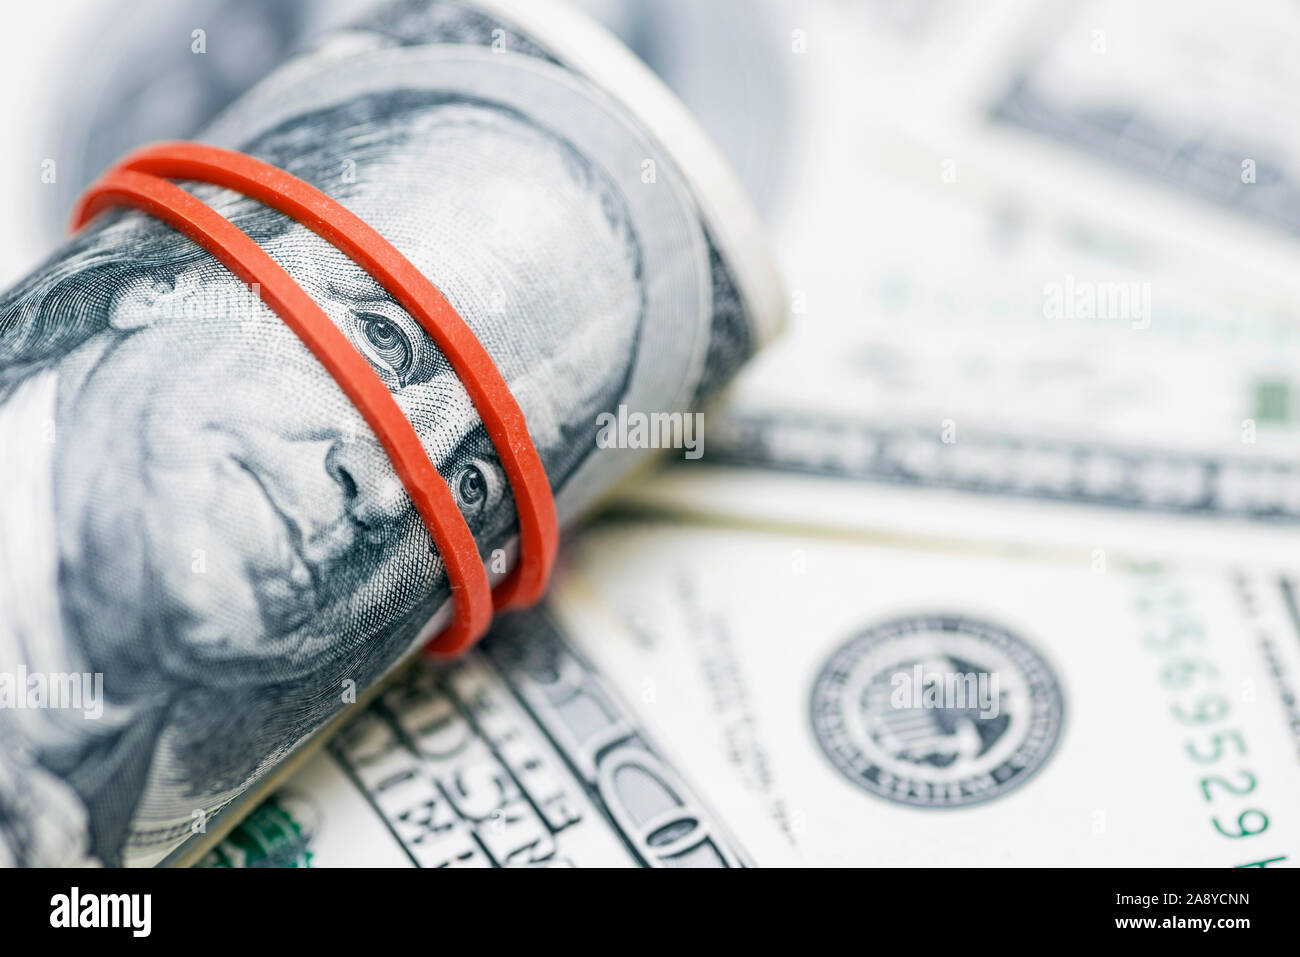 A roll of 100 dollar bills close-up on a pile of American dollars. Background from banknotes of 100 american dollars. Financial concept. Stock Photo